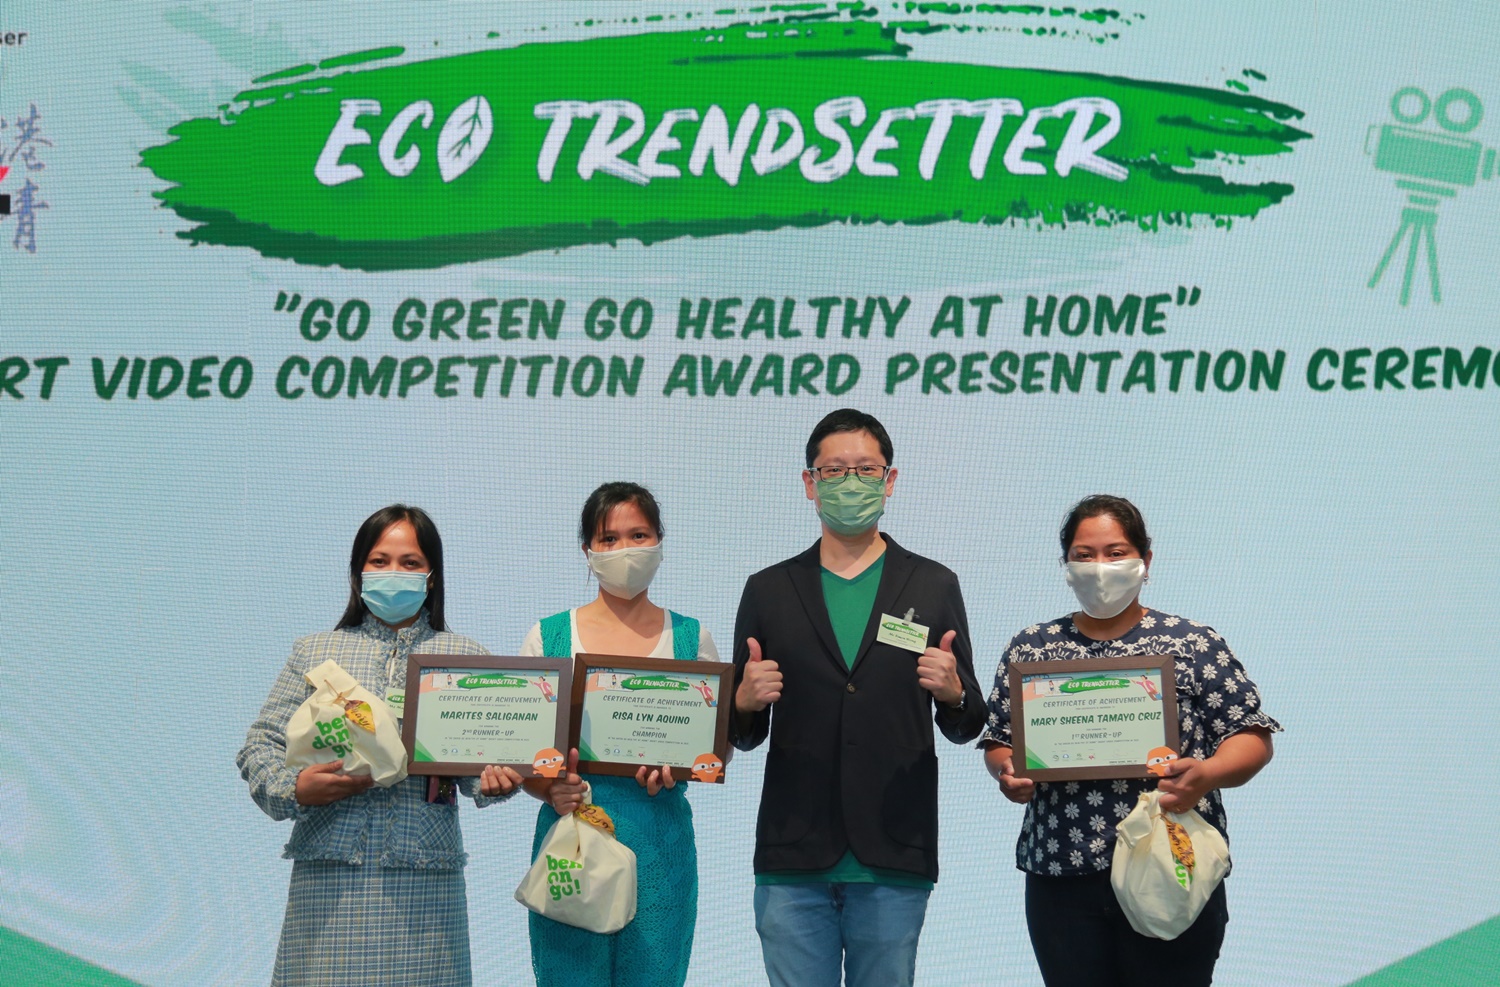 Go Green Go Healthy at Home Short Video Competition Award Presentation Ceremony